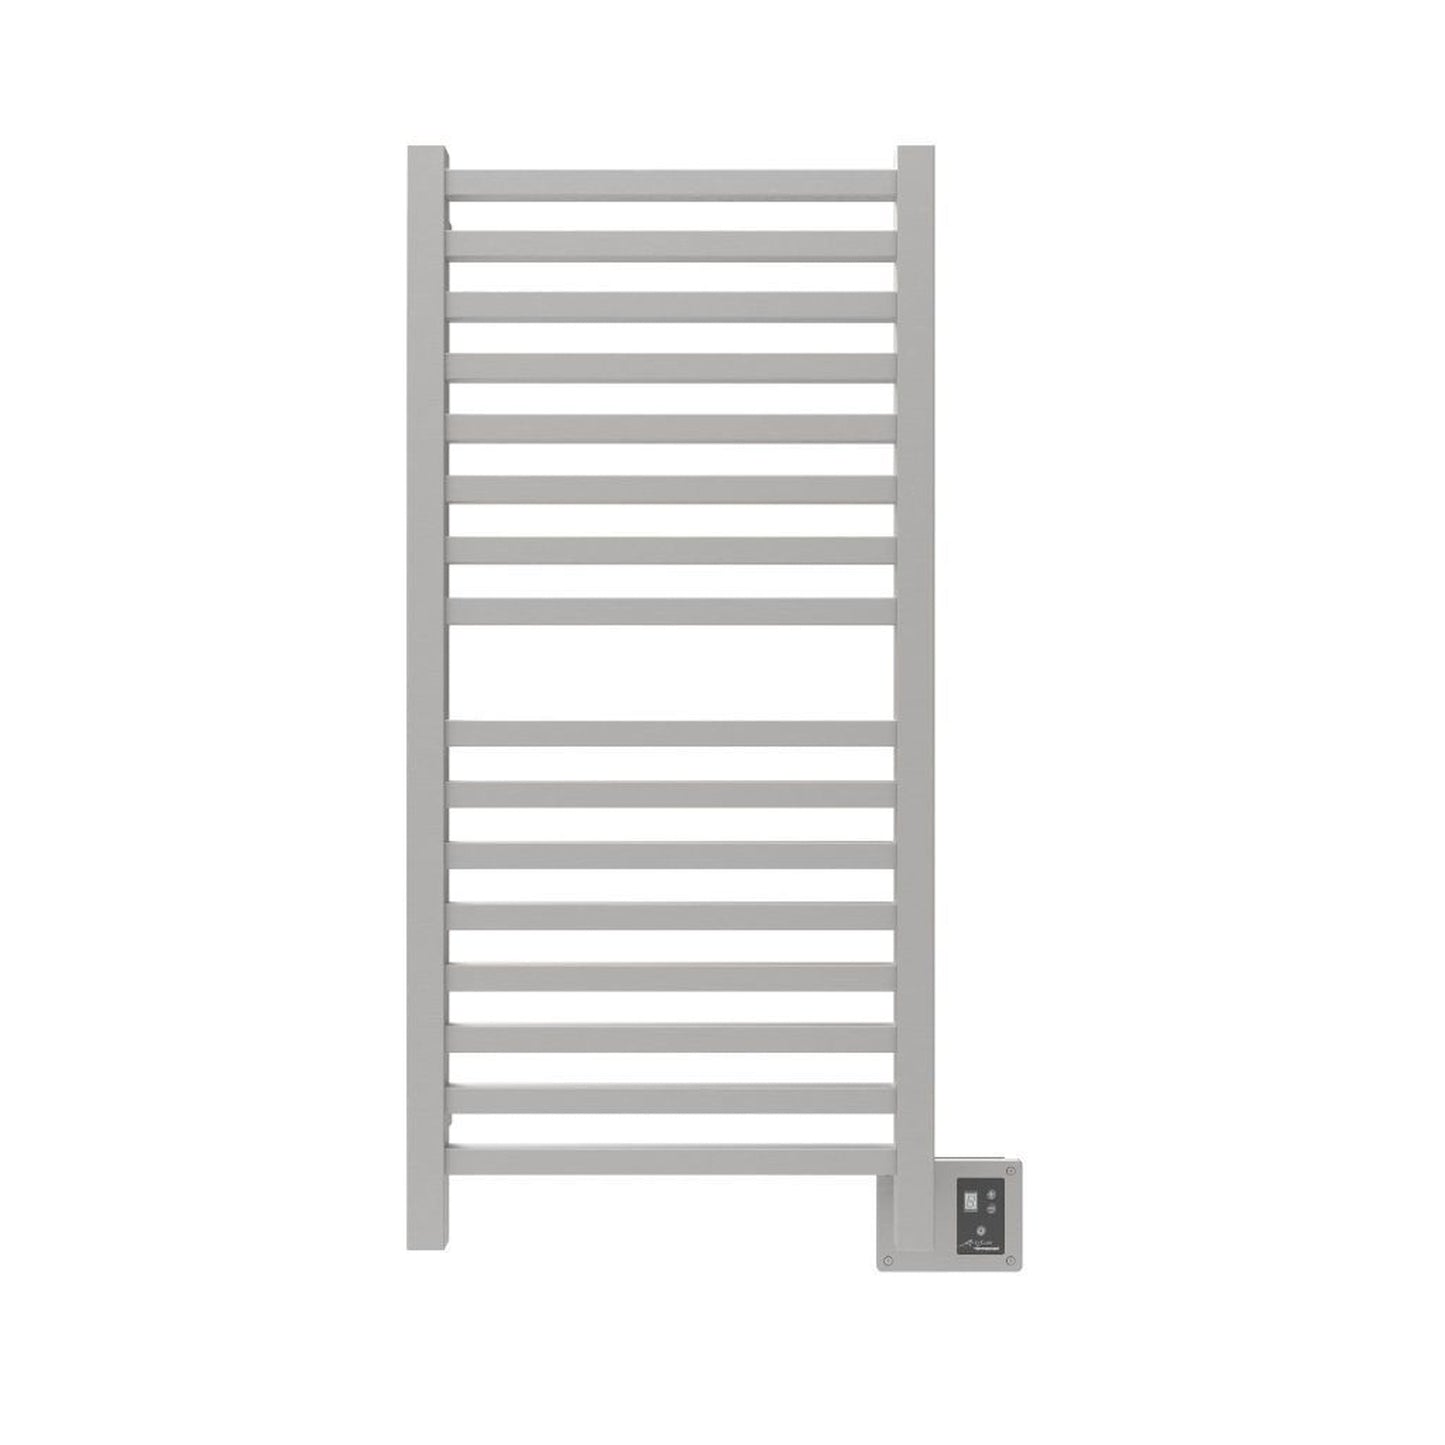 Amba Quadro 20" x 42" 16-Bar Brushed Stainless Steel Hardwired Towel Warmer With Digital Heat Controller